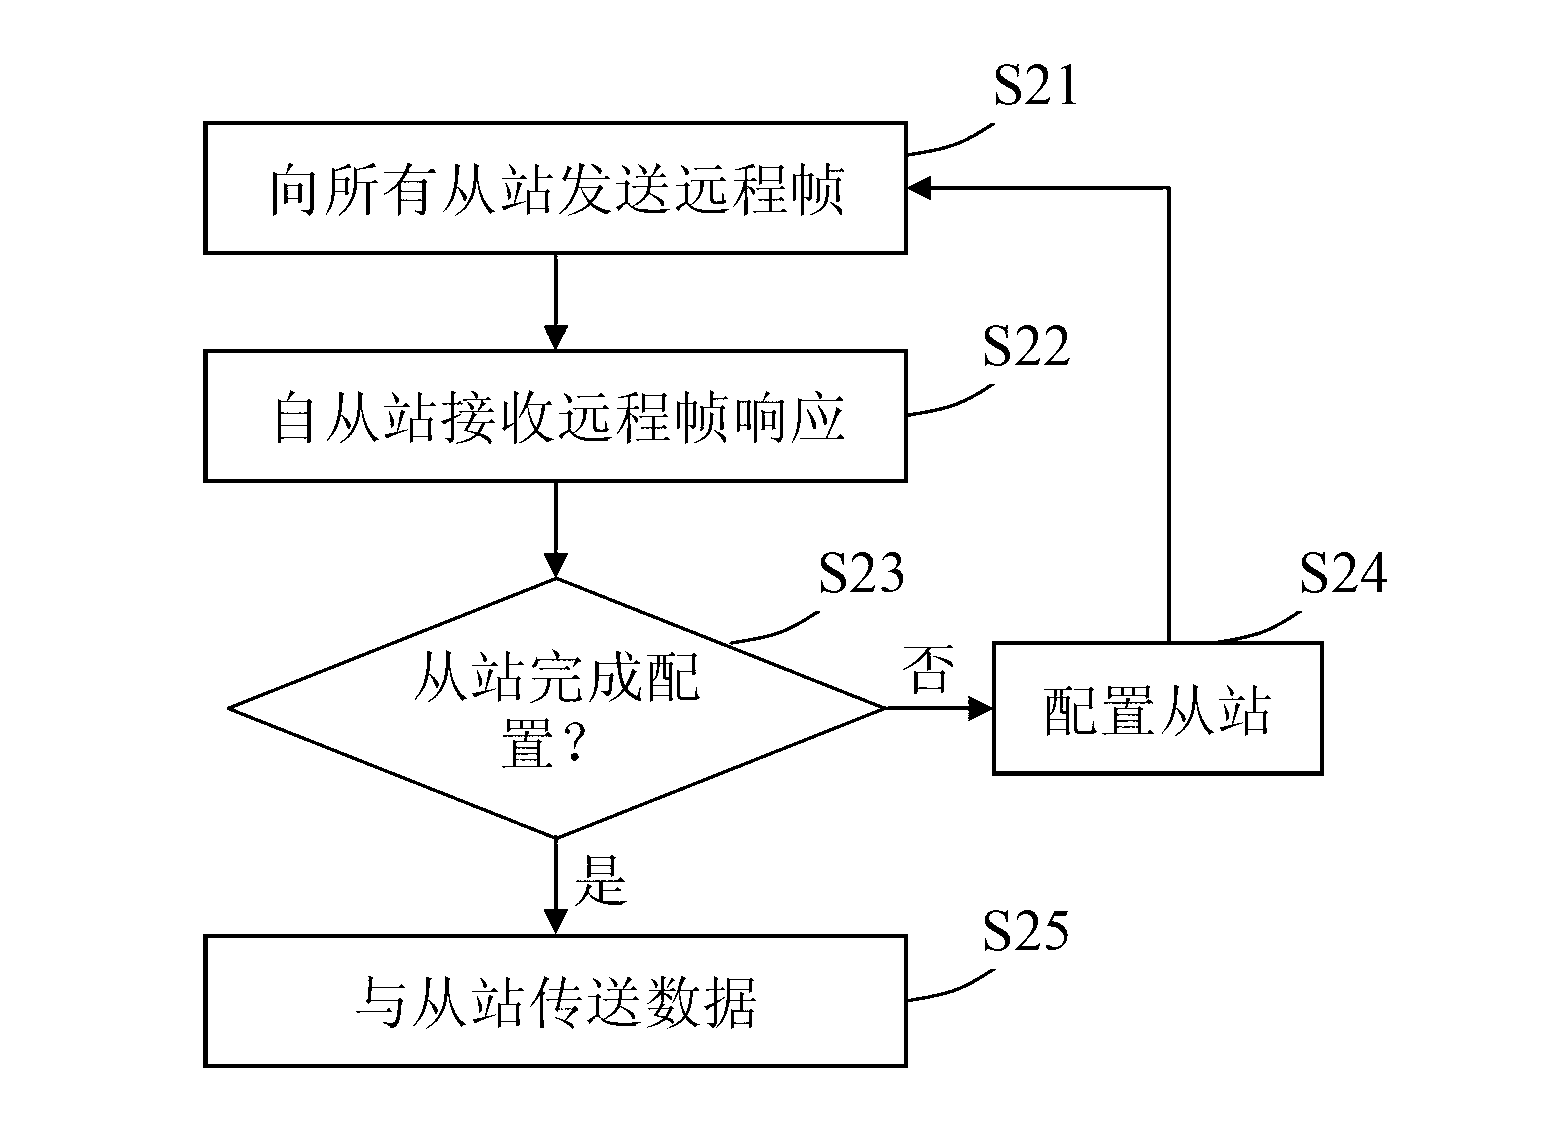 Communication system and communication method based on CAN (Controller Area Network)